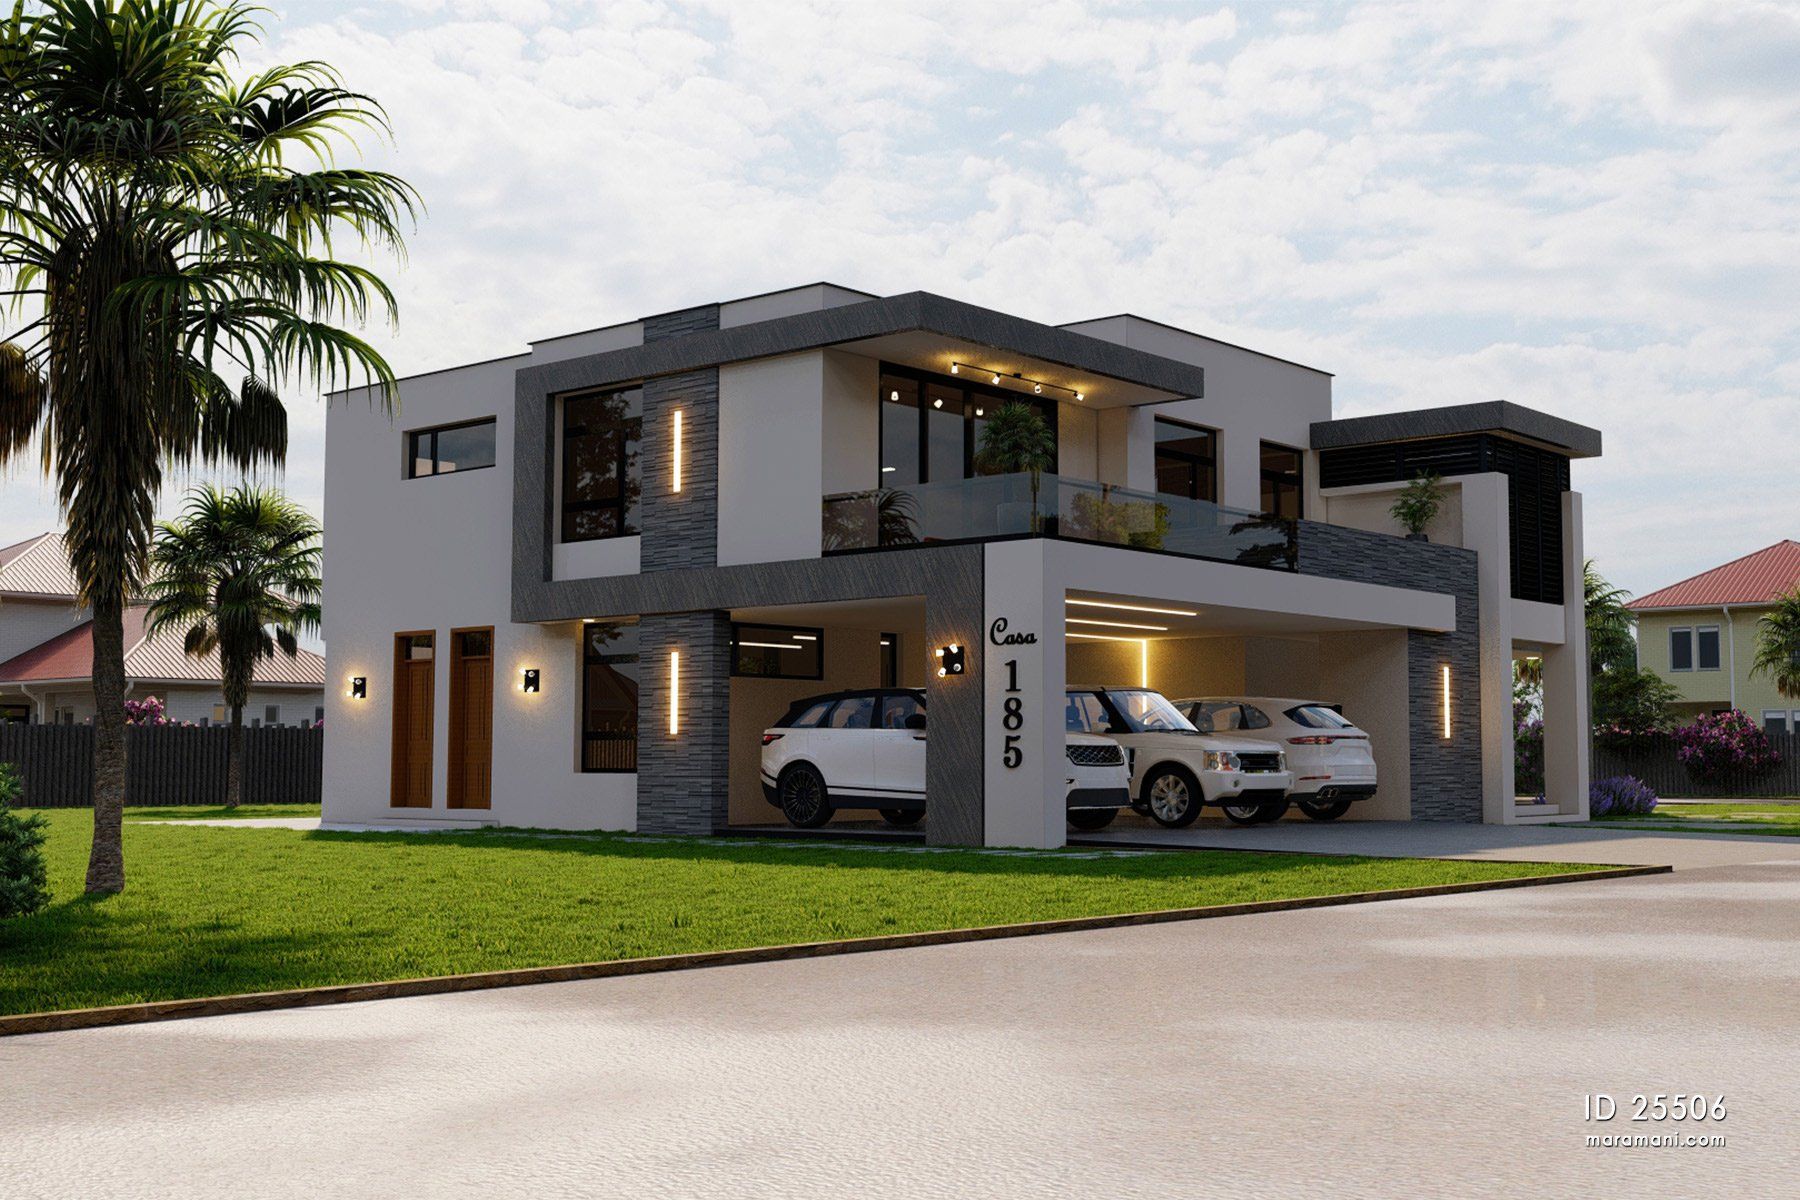 5 Bedroom Double Storey House Plans Pdf : Maybe you would like to learn